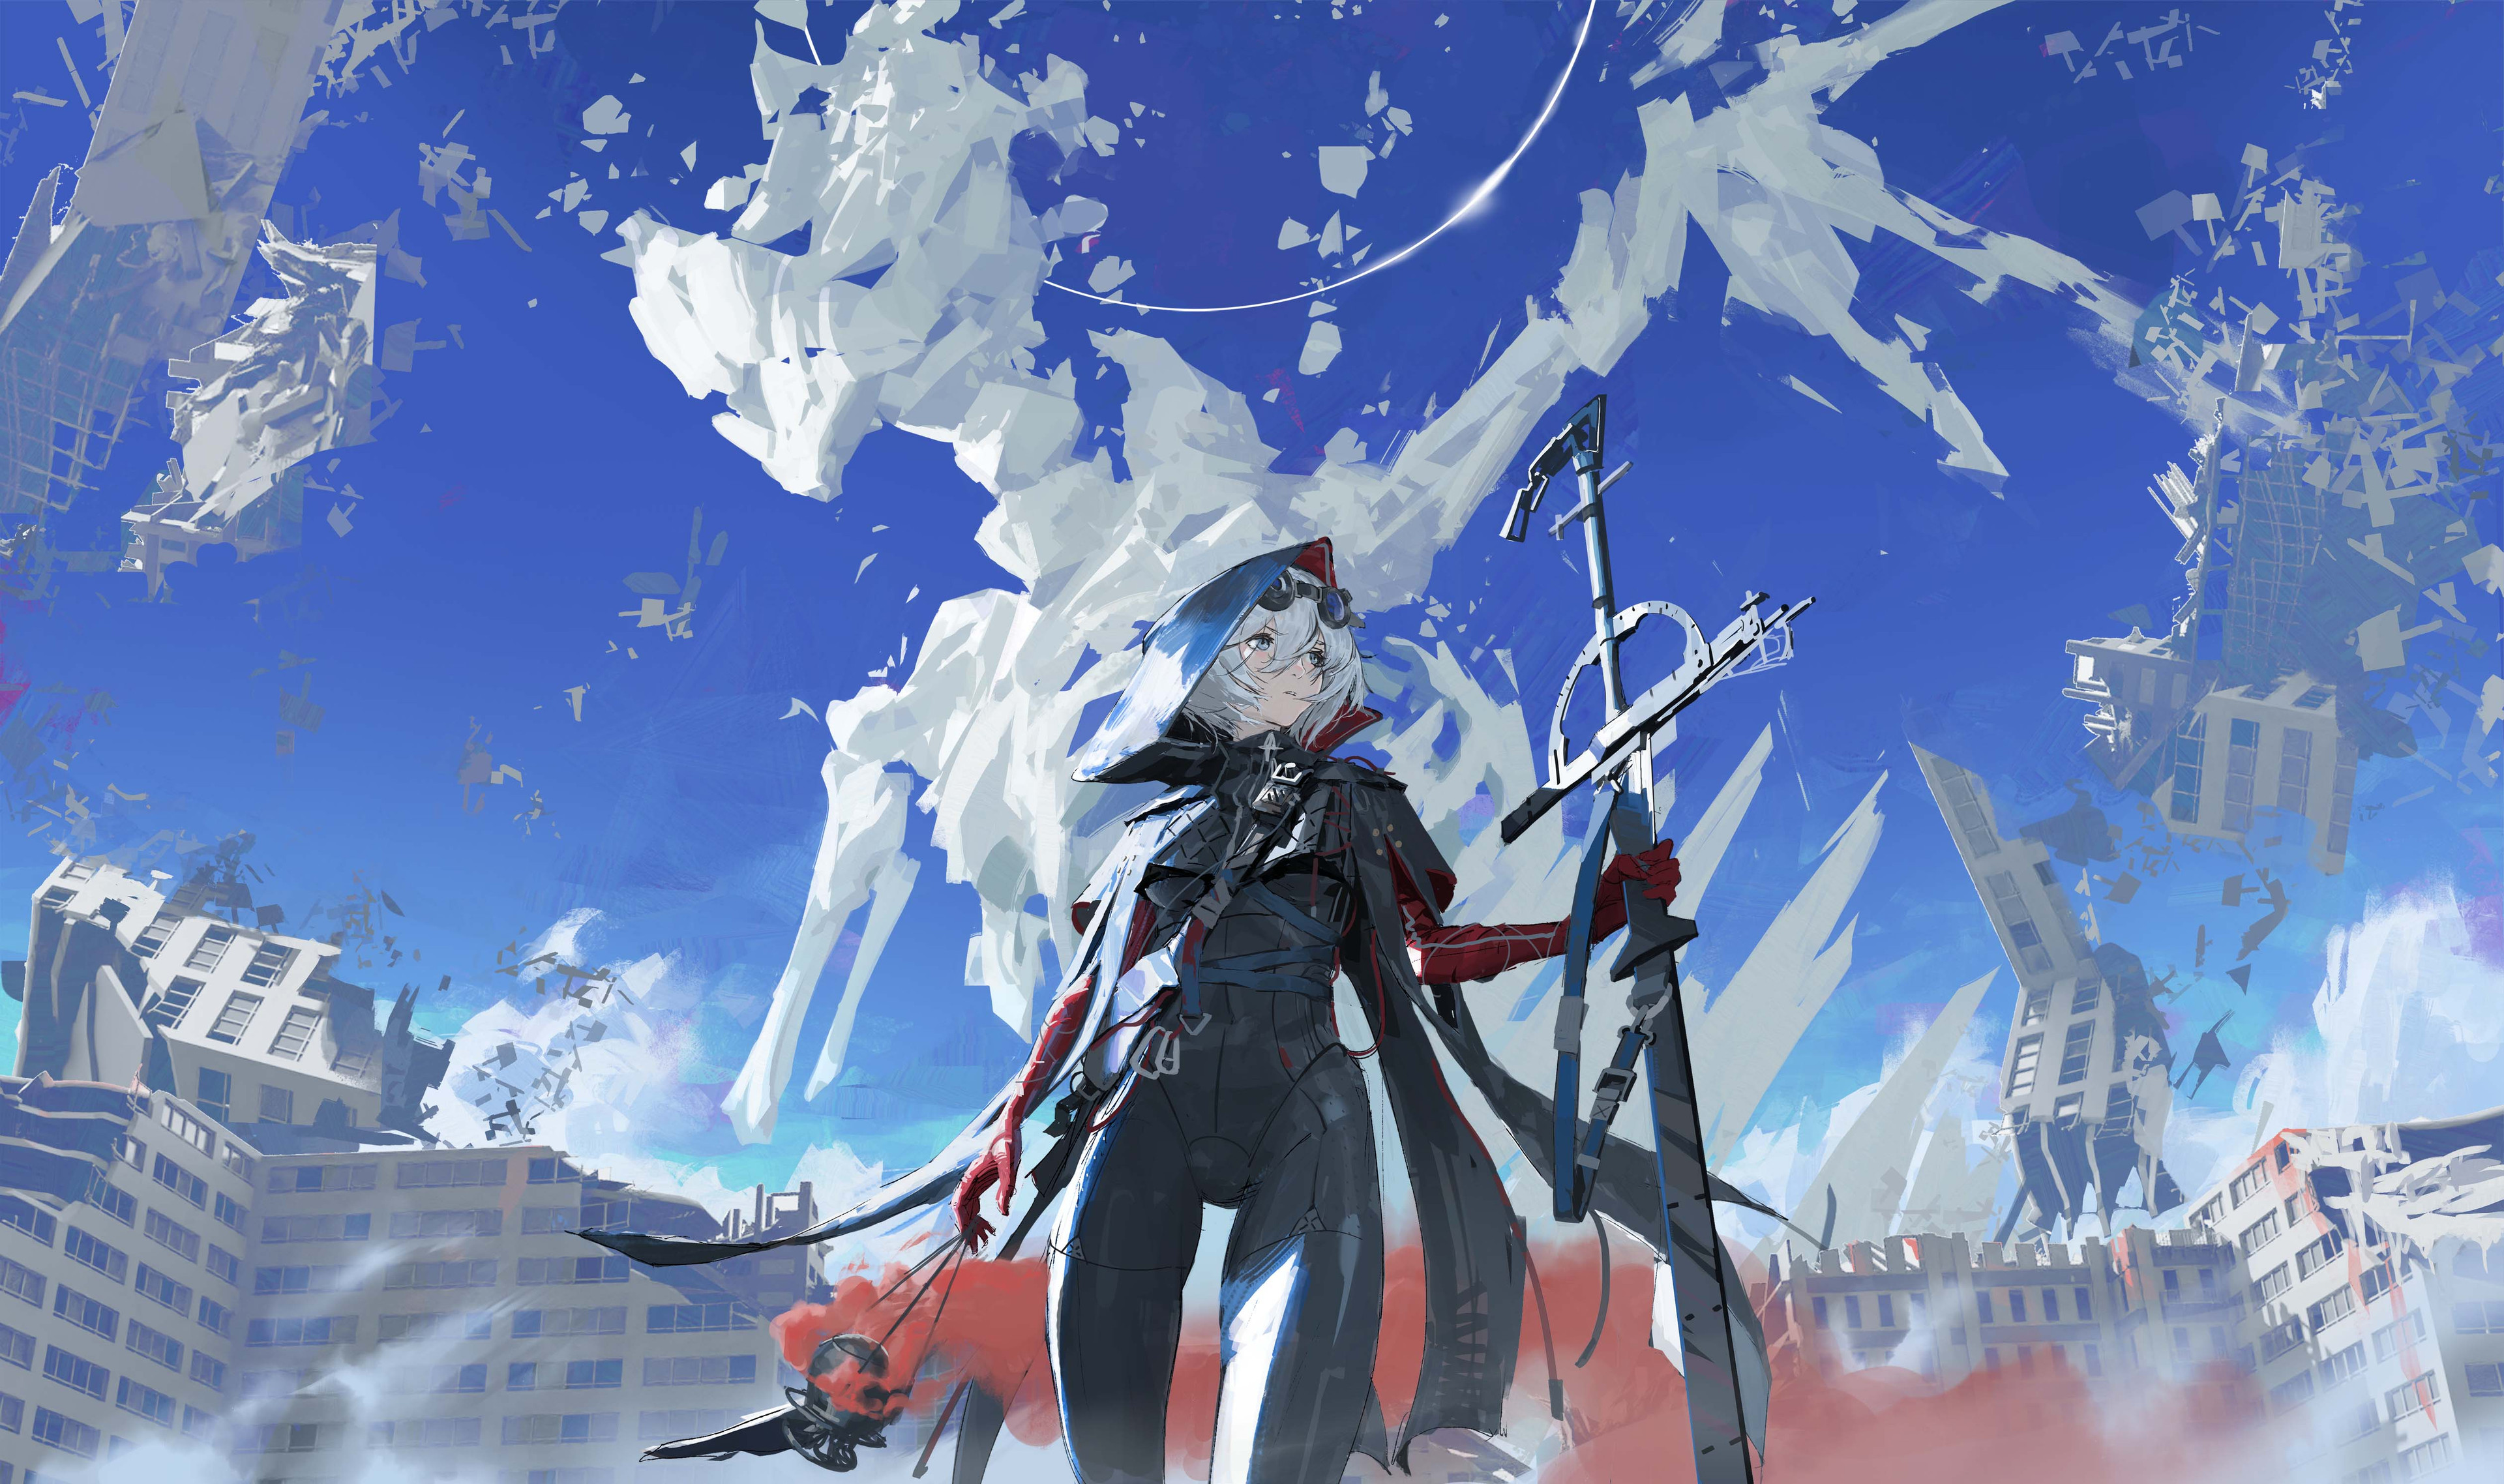 Anime 3840x2276 Jef Wu black bodysuit looking away bodysuit weapon elbow gloves low-angle short hair gray hair standing women outdoors sky red gloves parted lips city ruins clouds